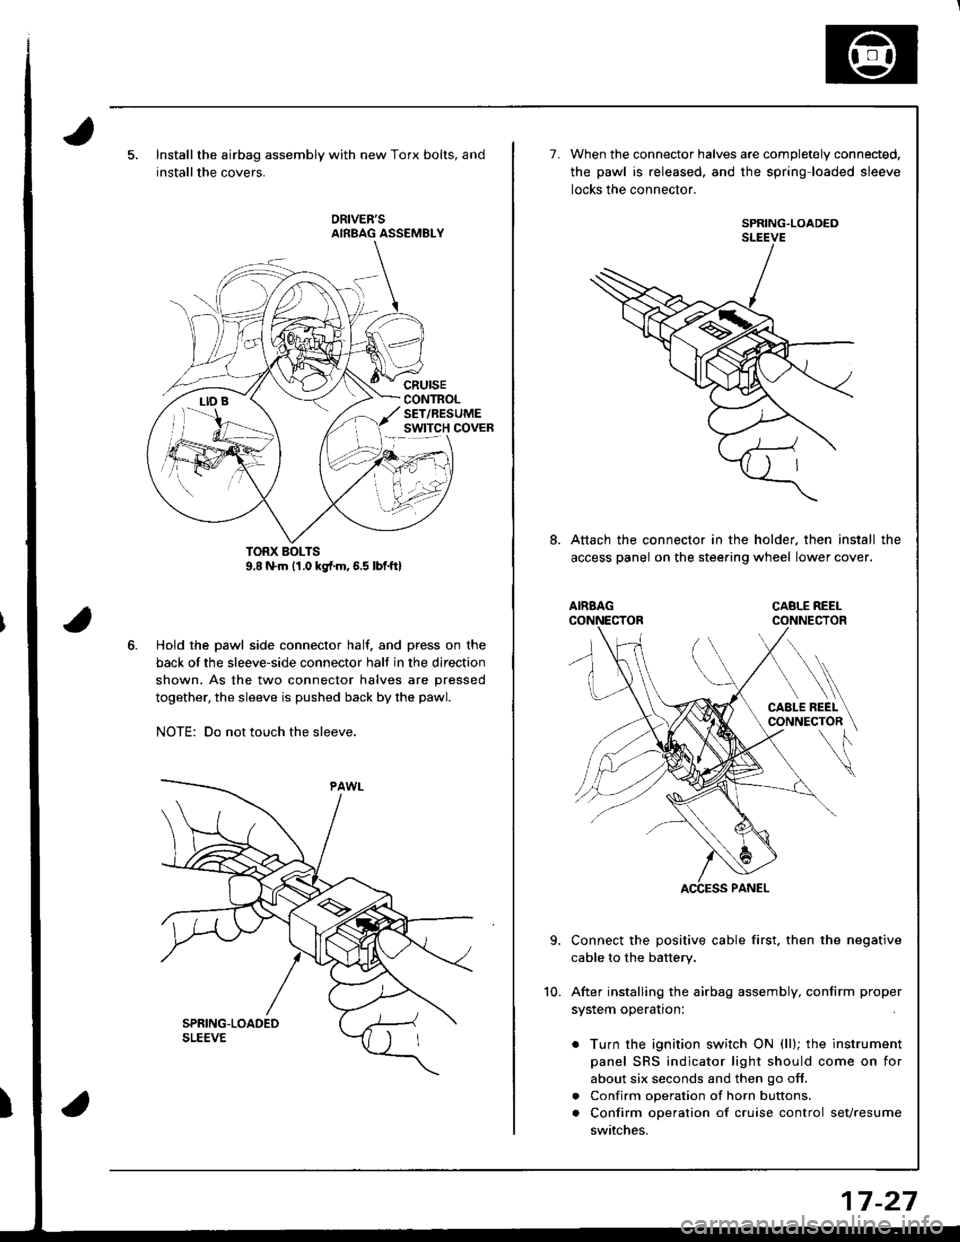 HONDA INTEGRA 1998 4.G Workshop Manual Installthe airbag assembly with new Torx bolts, and
installthe covers.
cRursECONTROLSET/RESUMEswtTcH covER
Hold the pawl side connector half. and press on the
back of the sleeve-side connector halt in